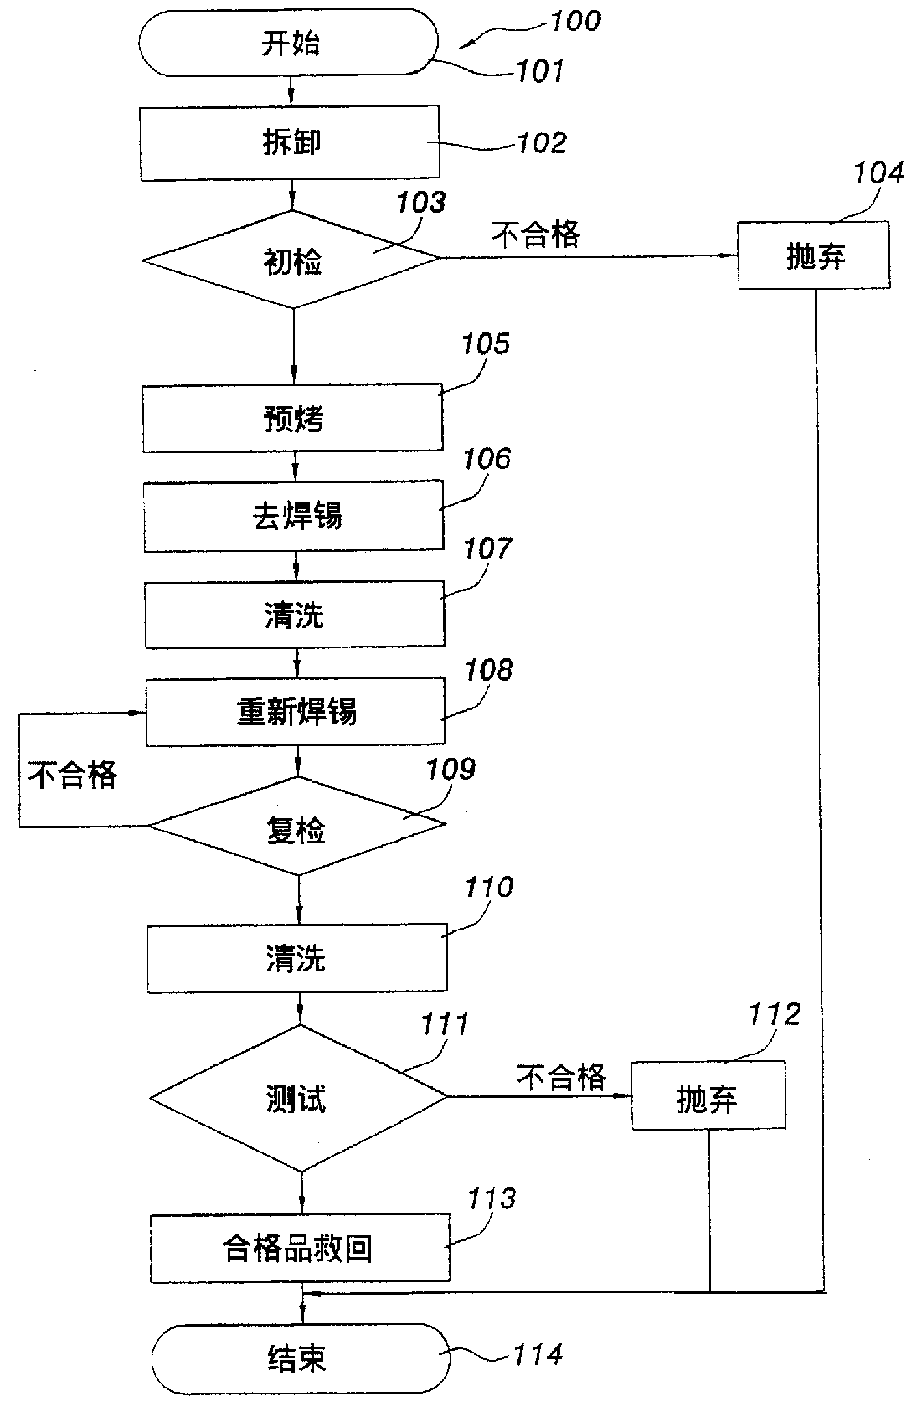 Retreating method for saving integrated circuit assembly